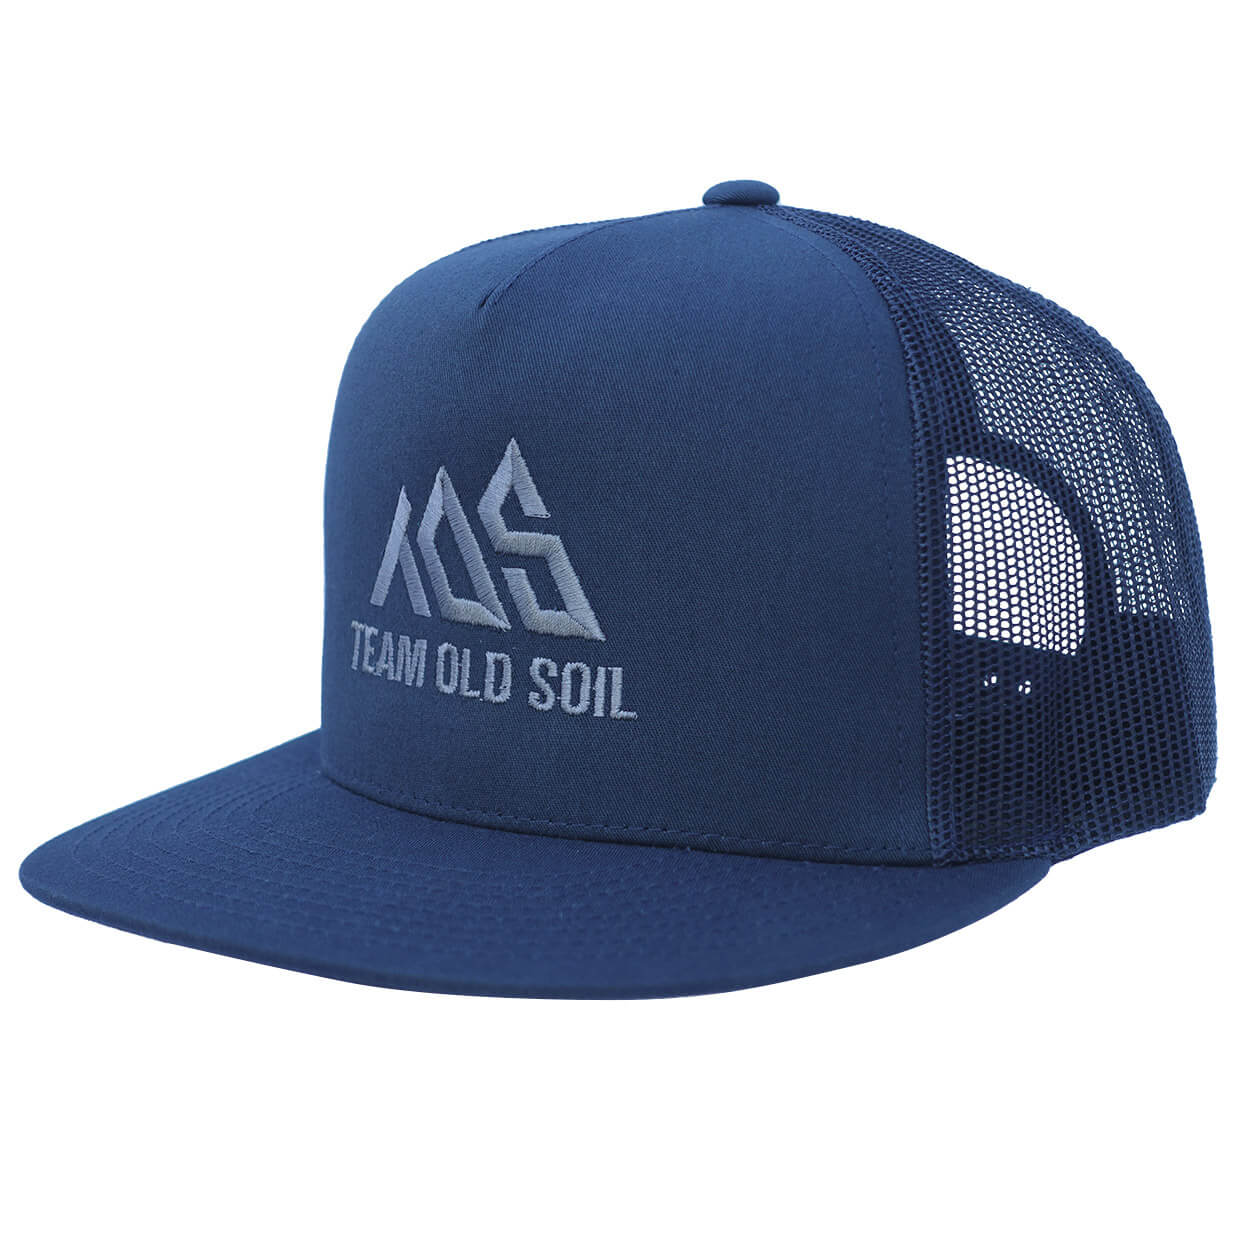 Flat bill snap back embroidered hat navy